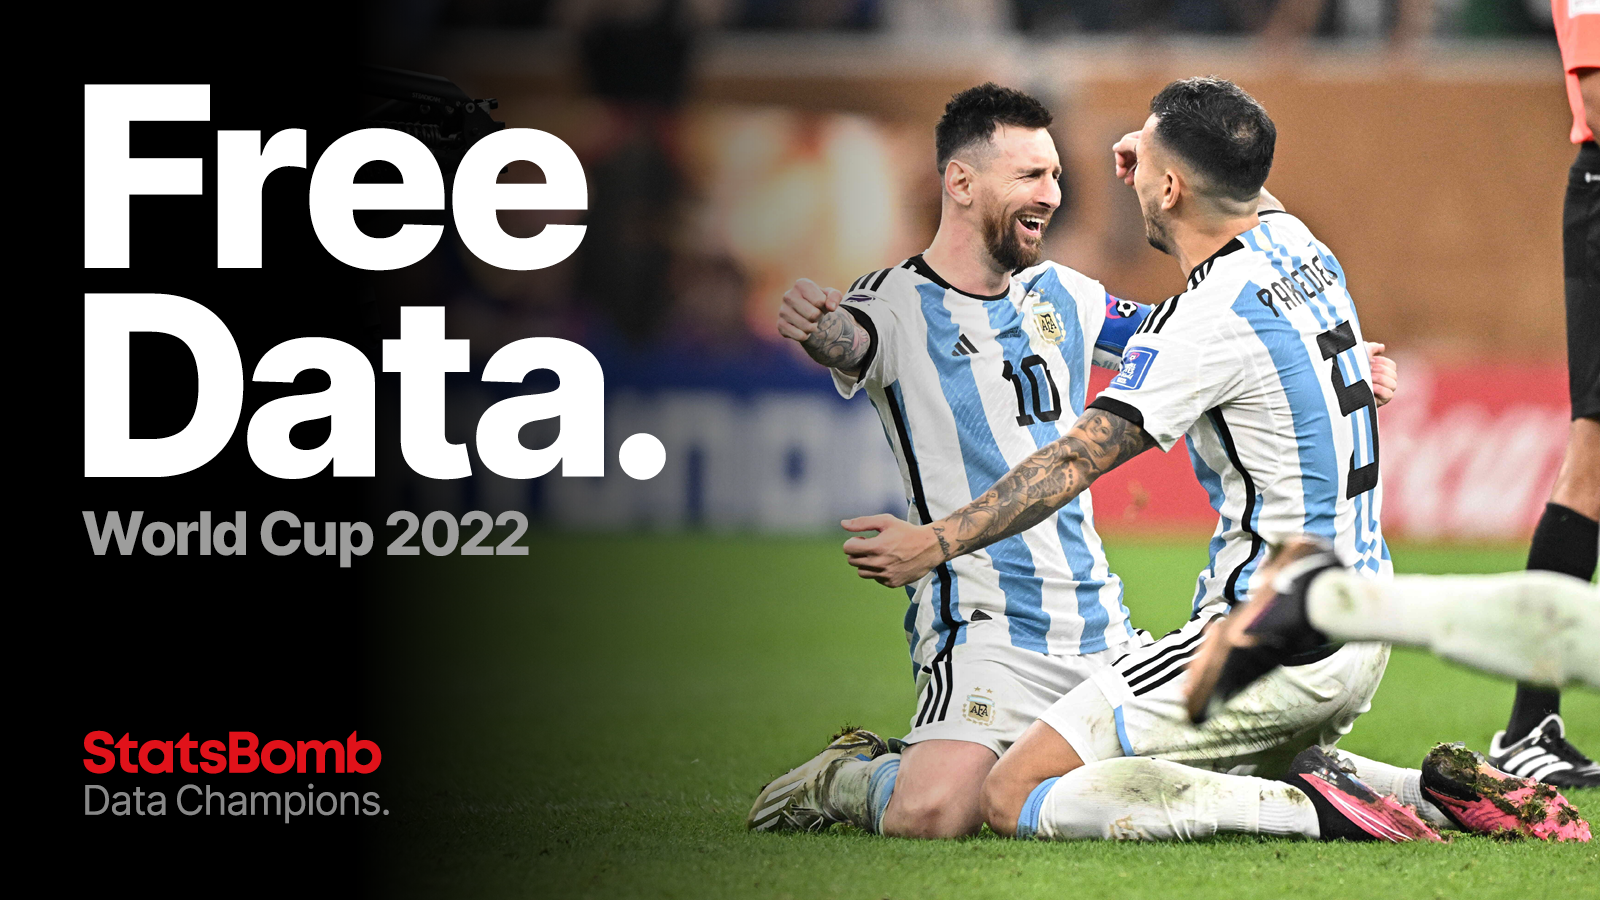 StatsBomb Release Free 2022 World Cup Data